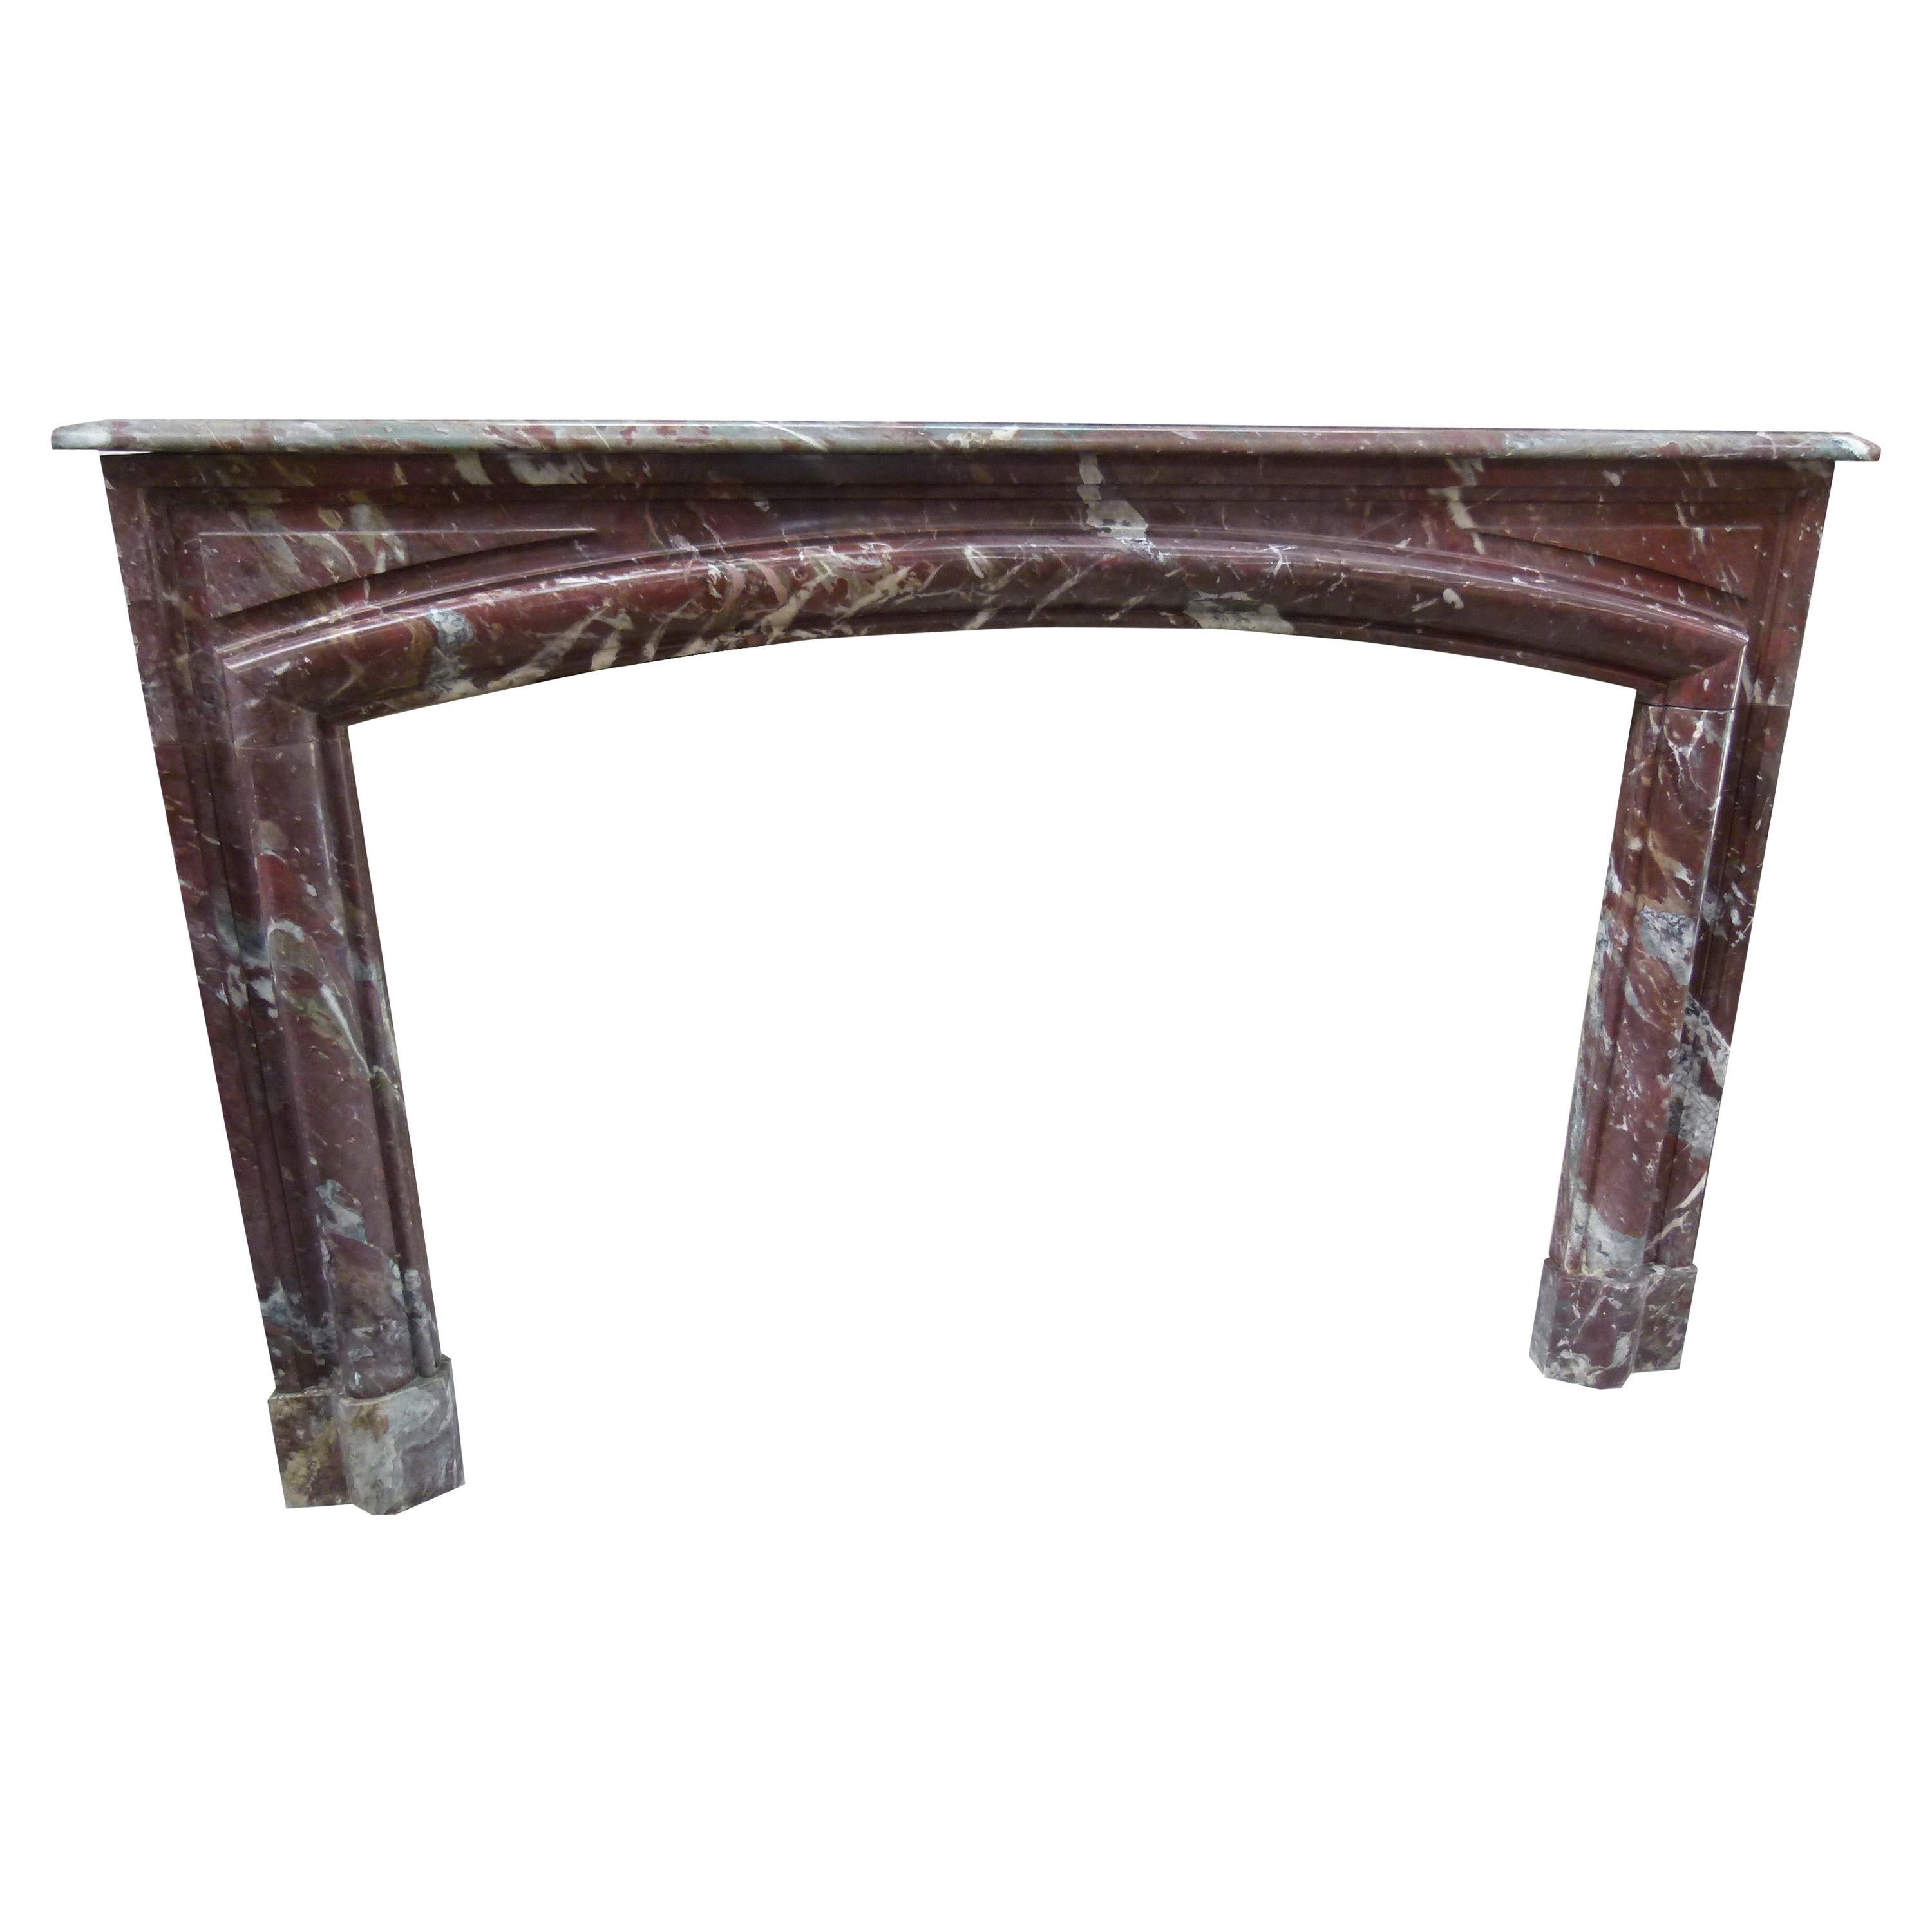 19th Century in Louis XIV Style Languedoc Marble Fireplace Mantel